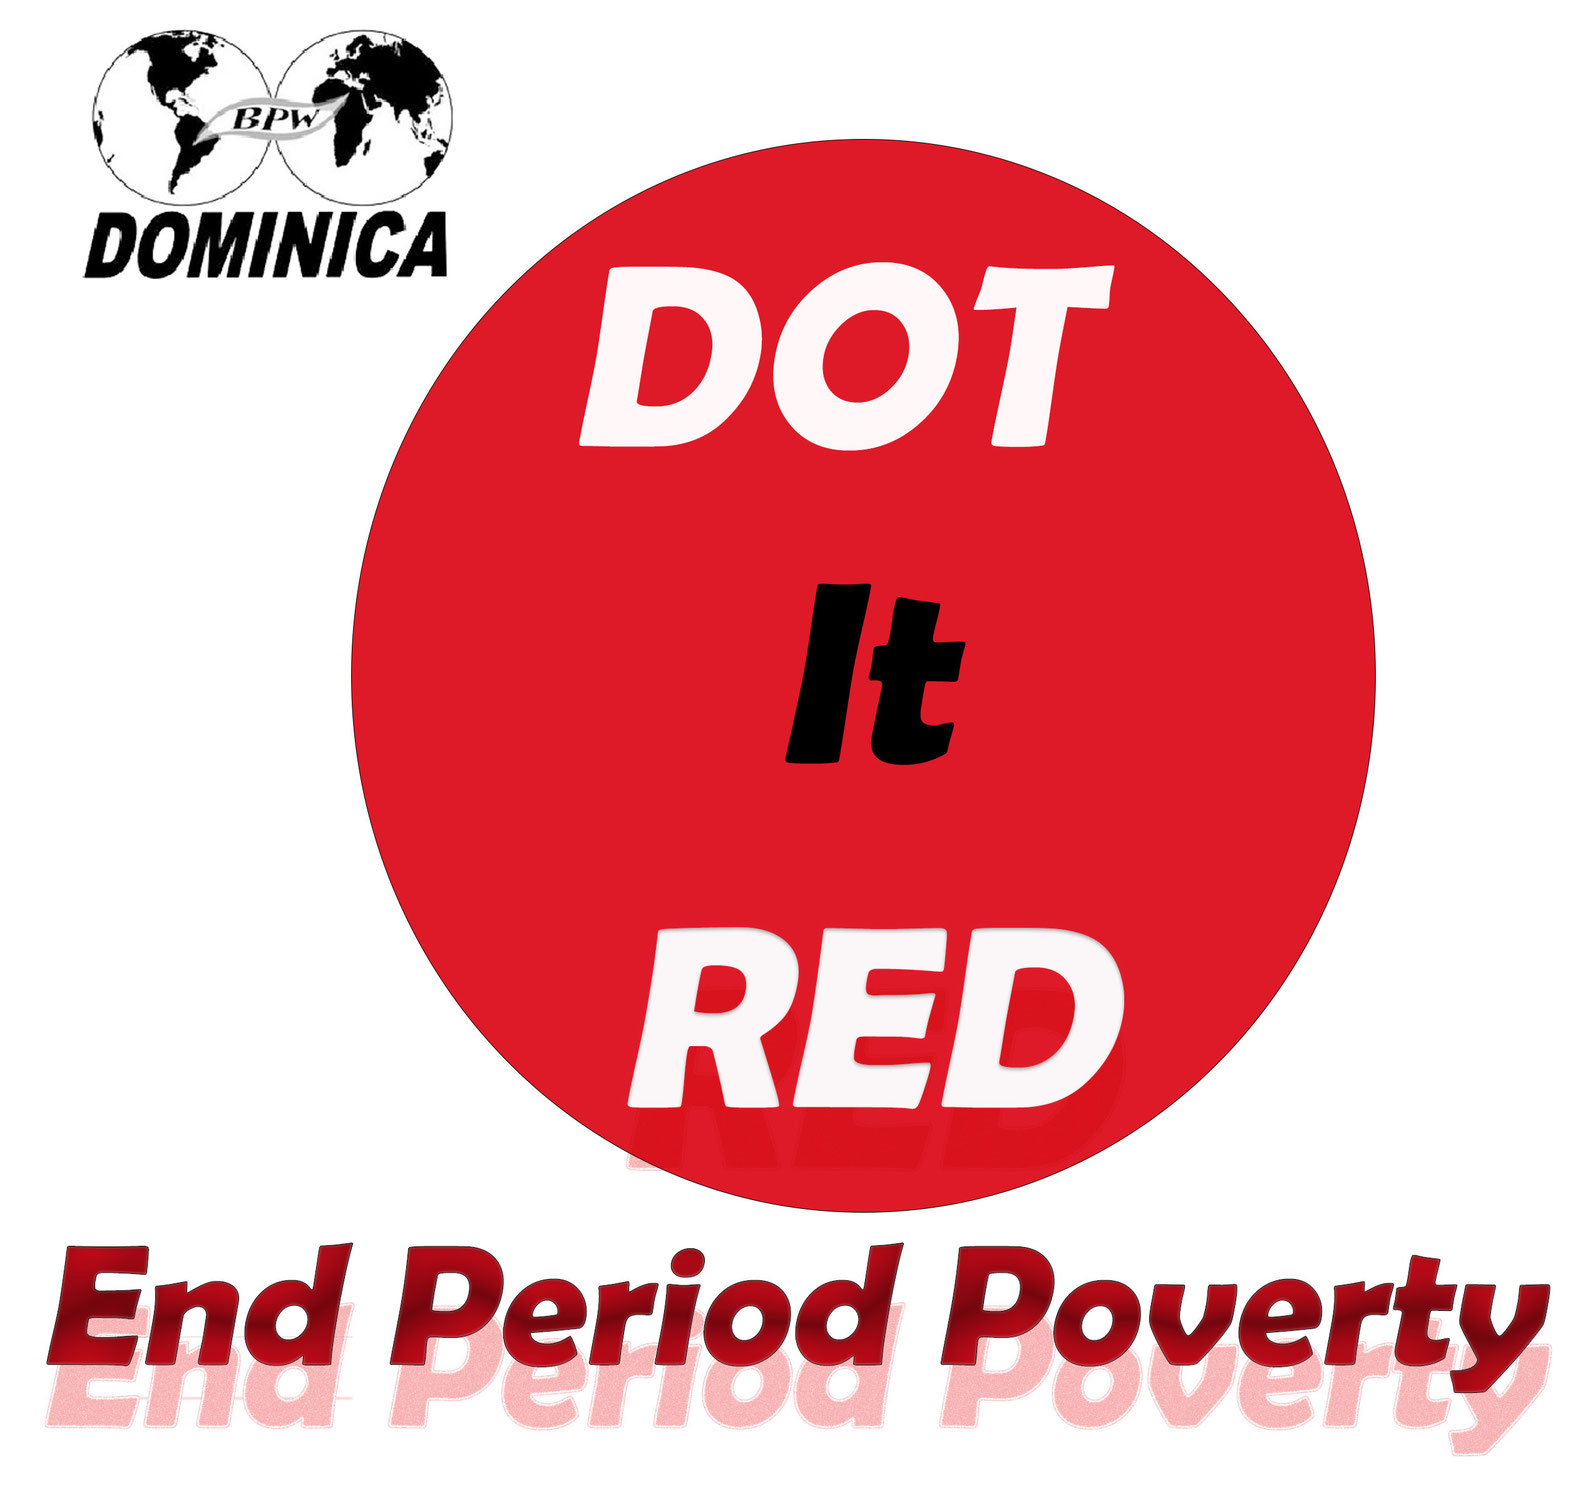 New Project - End Period Poverty "EPP"